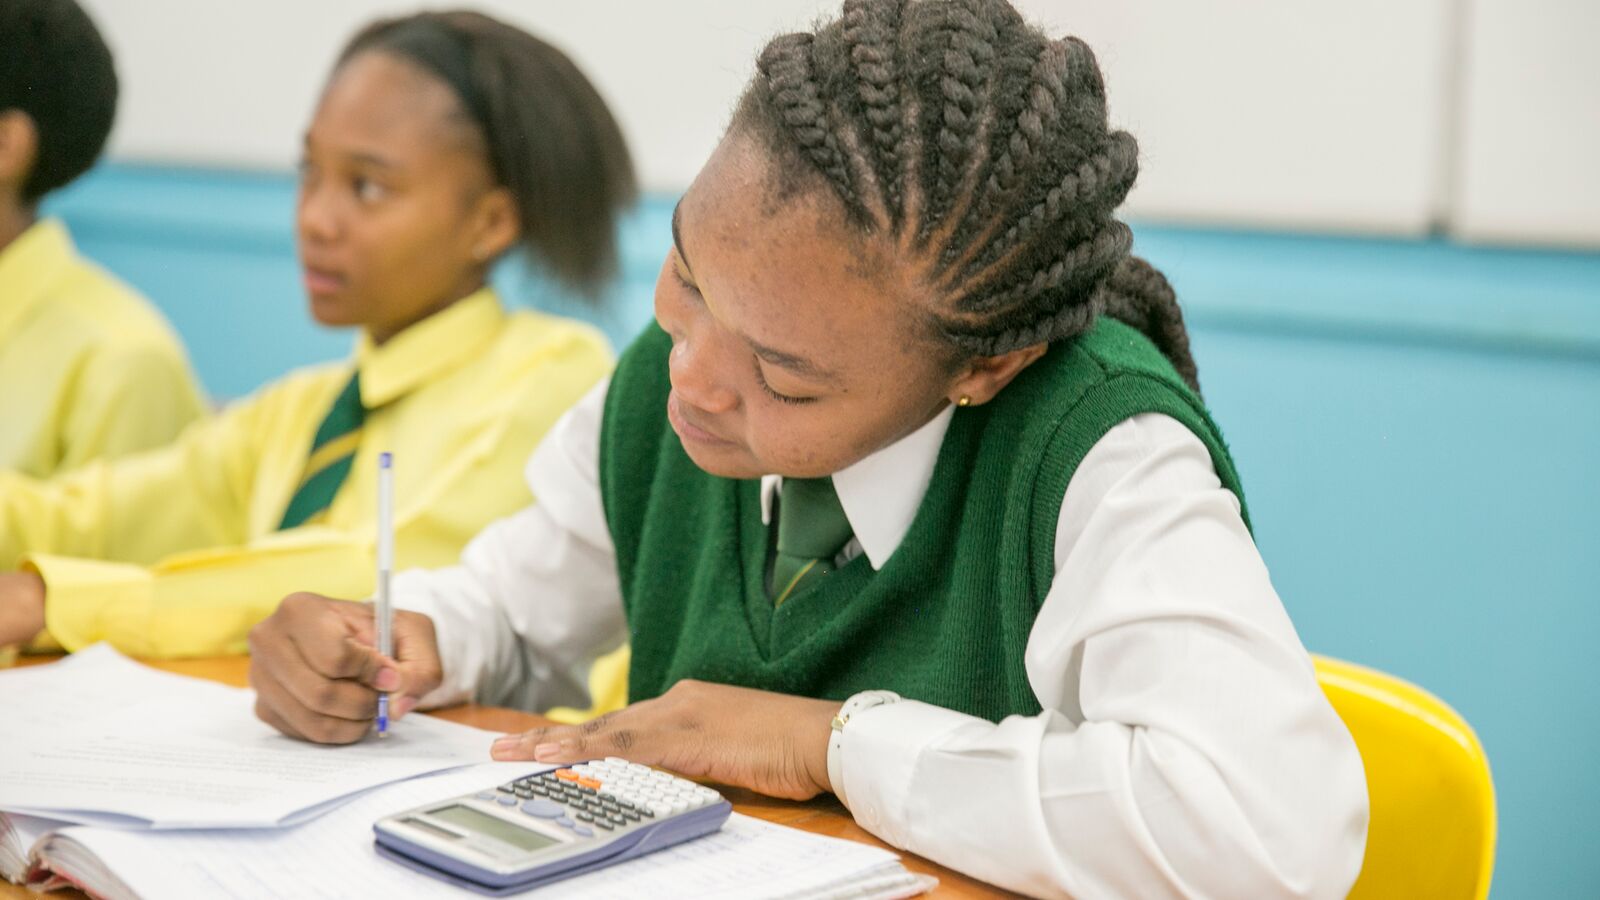 A South African student uses a calculator next to her peer